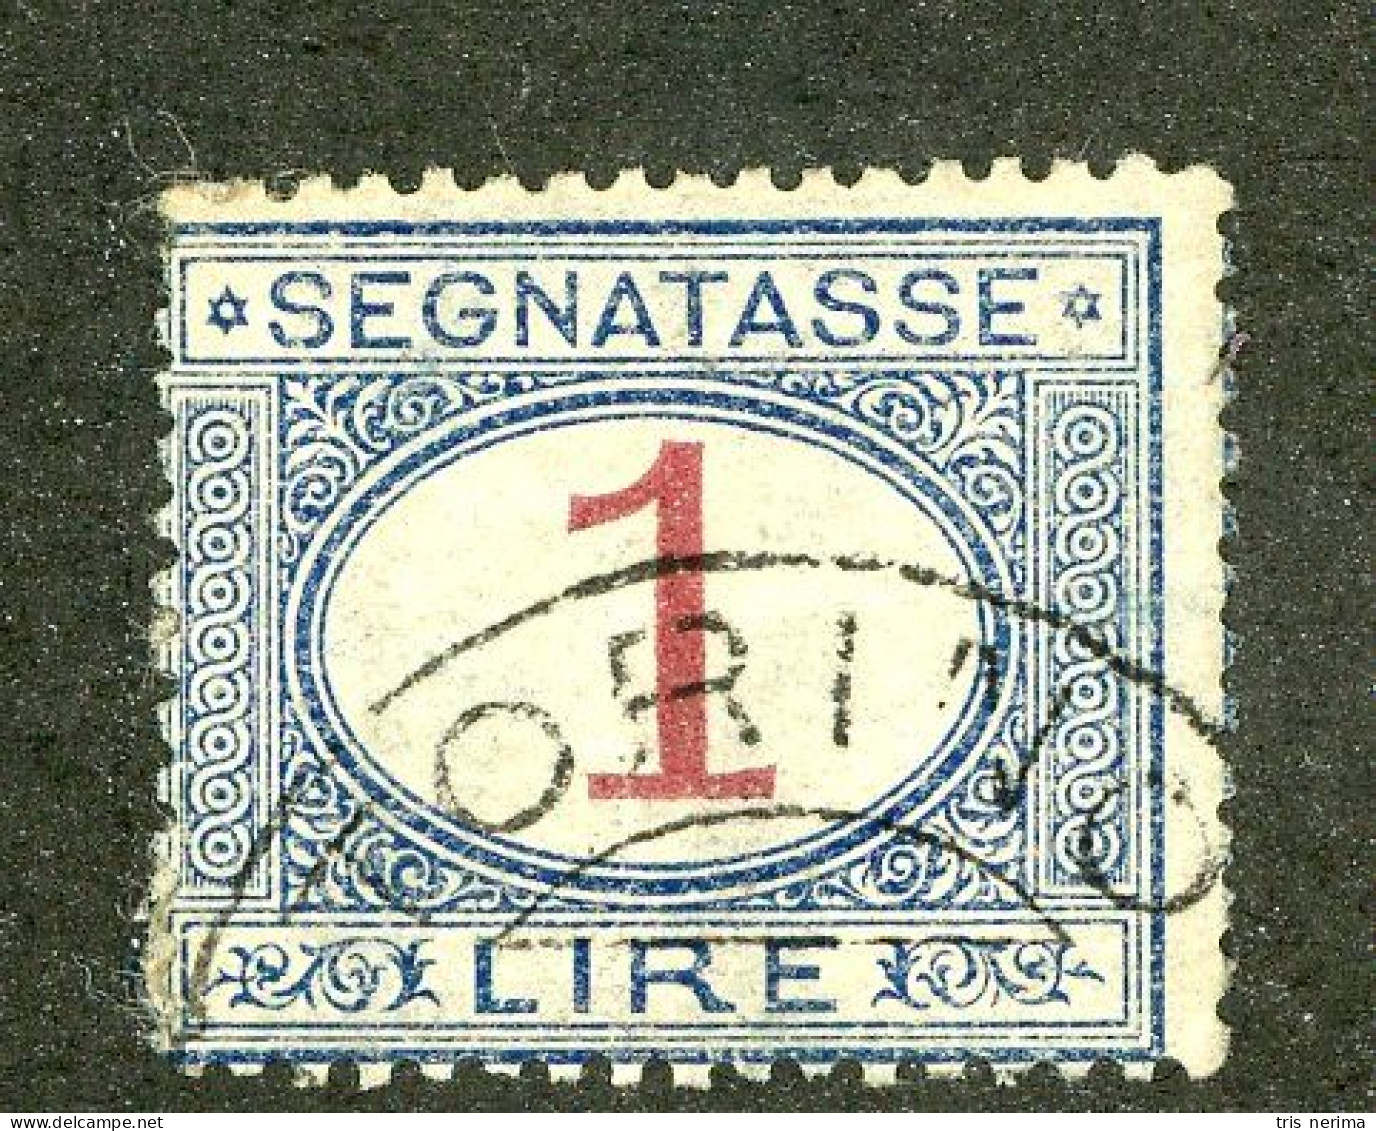 1037 Italy 1894 Scott #J14 Used (Lower Bids 20% Off) - Postage Due